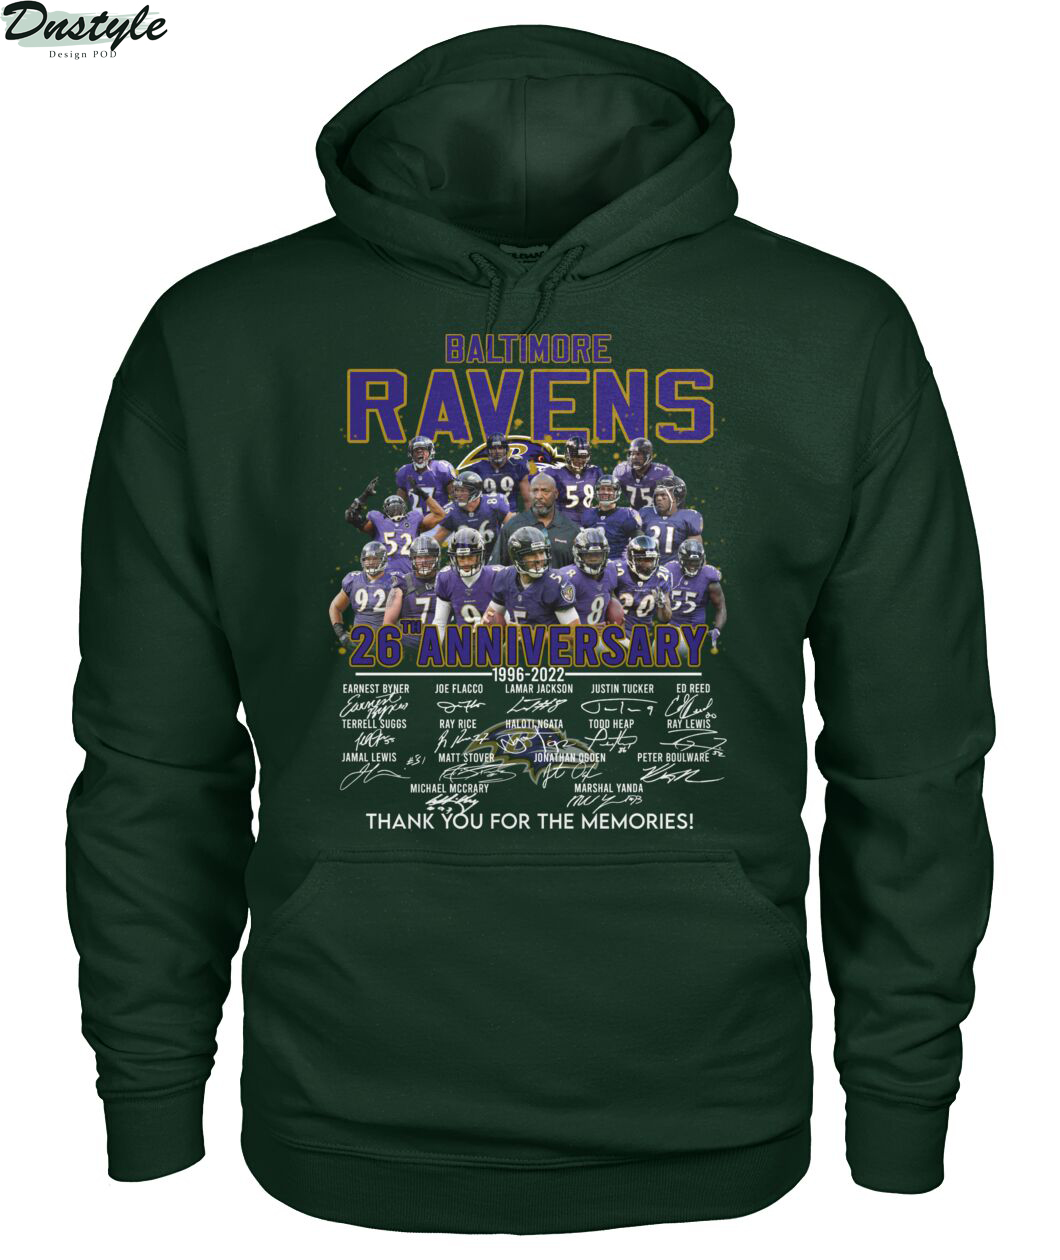 Baltimore ravens 26th anniversary thank you for the memories hoodie